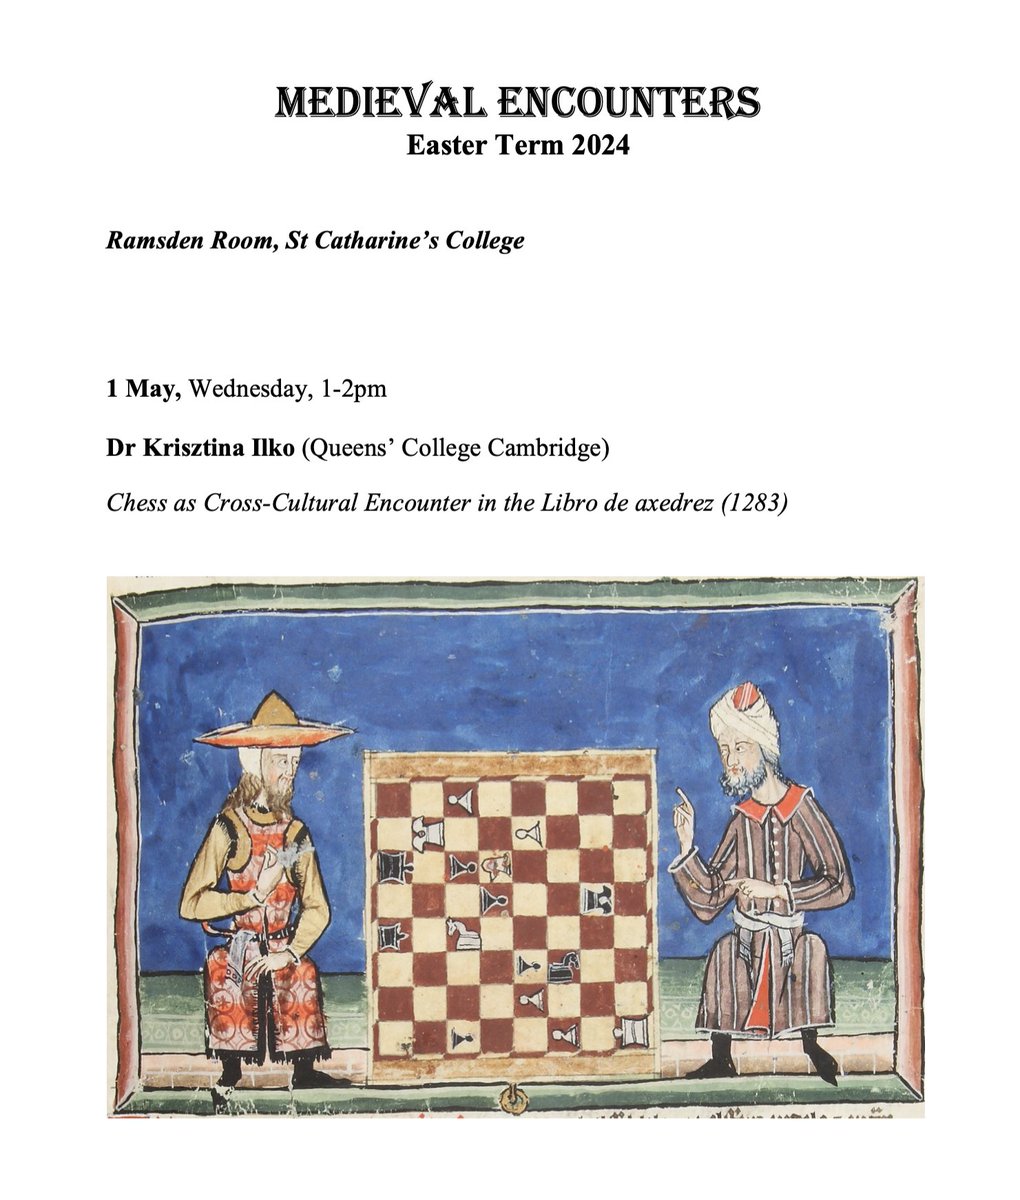 If you are in Cambridge, please pop in for my lunchtime talk tomorrow, 'Chess as Cross-Cultural Encounter in the Libro de axedrez (1283)' at the Medieval Encounters Seminar ---> 1 May, Wednesday, 1-2pm, Ramsden Room @Catz_Cambridge @Cambridge_Uni. All are welcome!